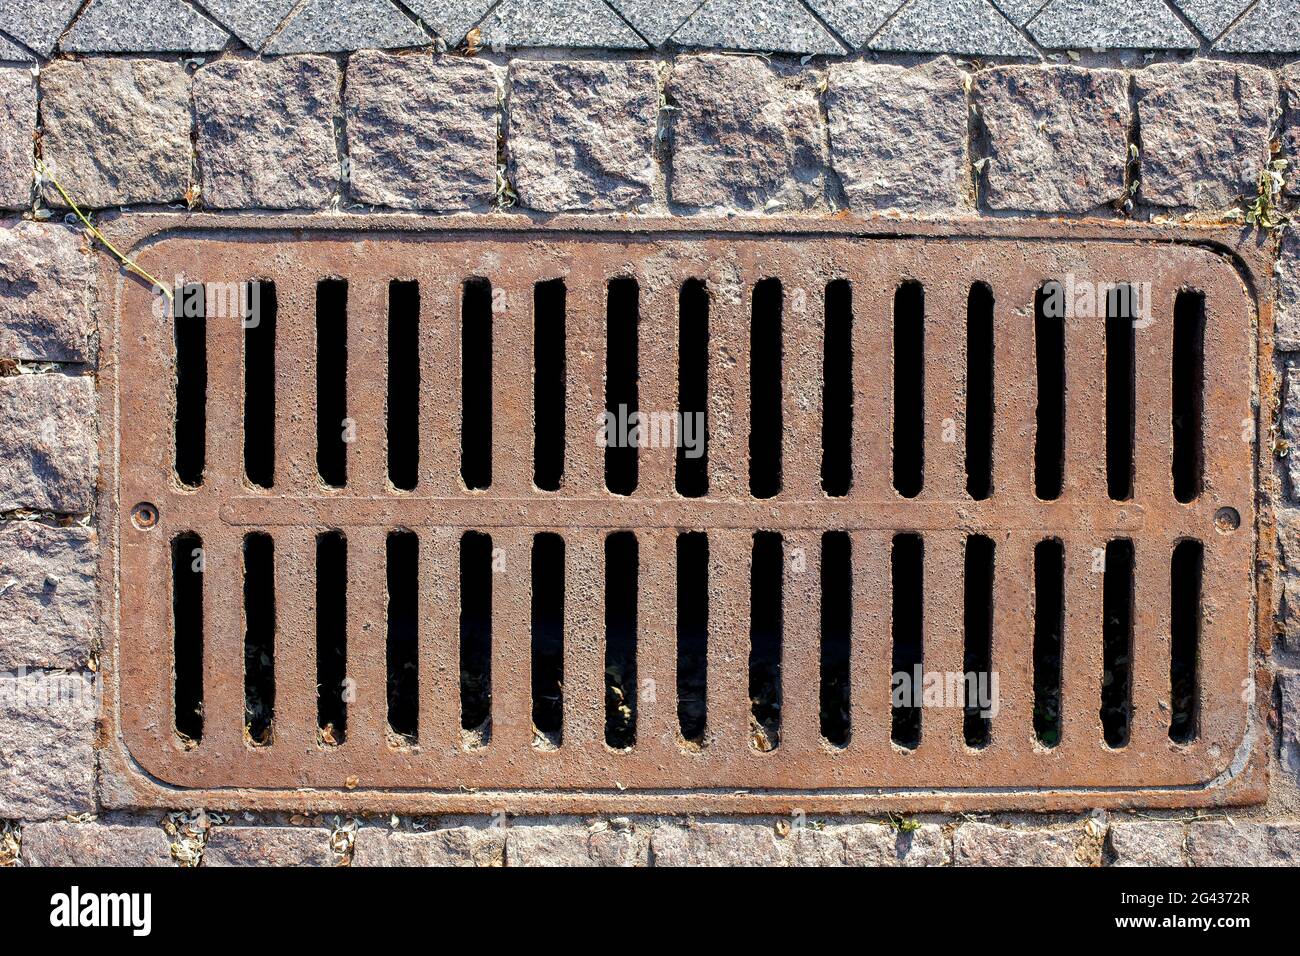 rusty manhole rectangular grating of the drainage system of the pedestrian sidewalk from rough cut stone tiles top view. Stock Photo